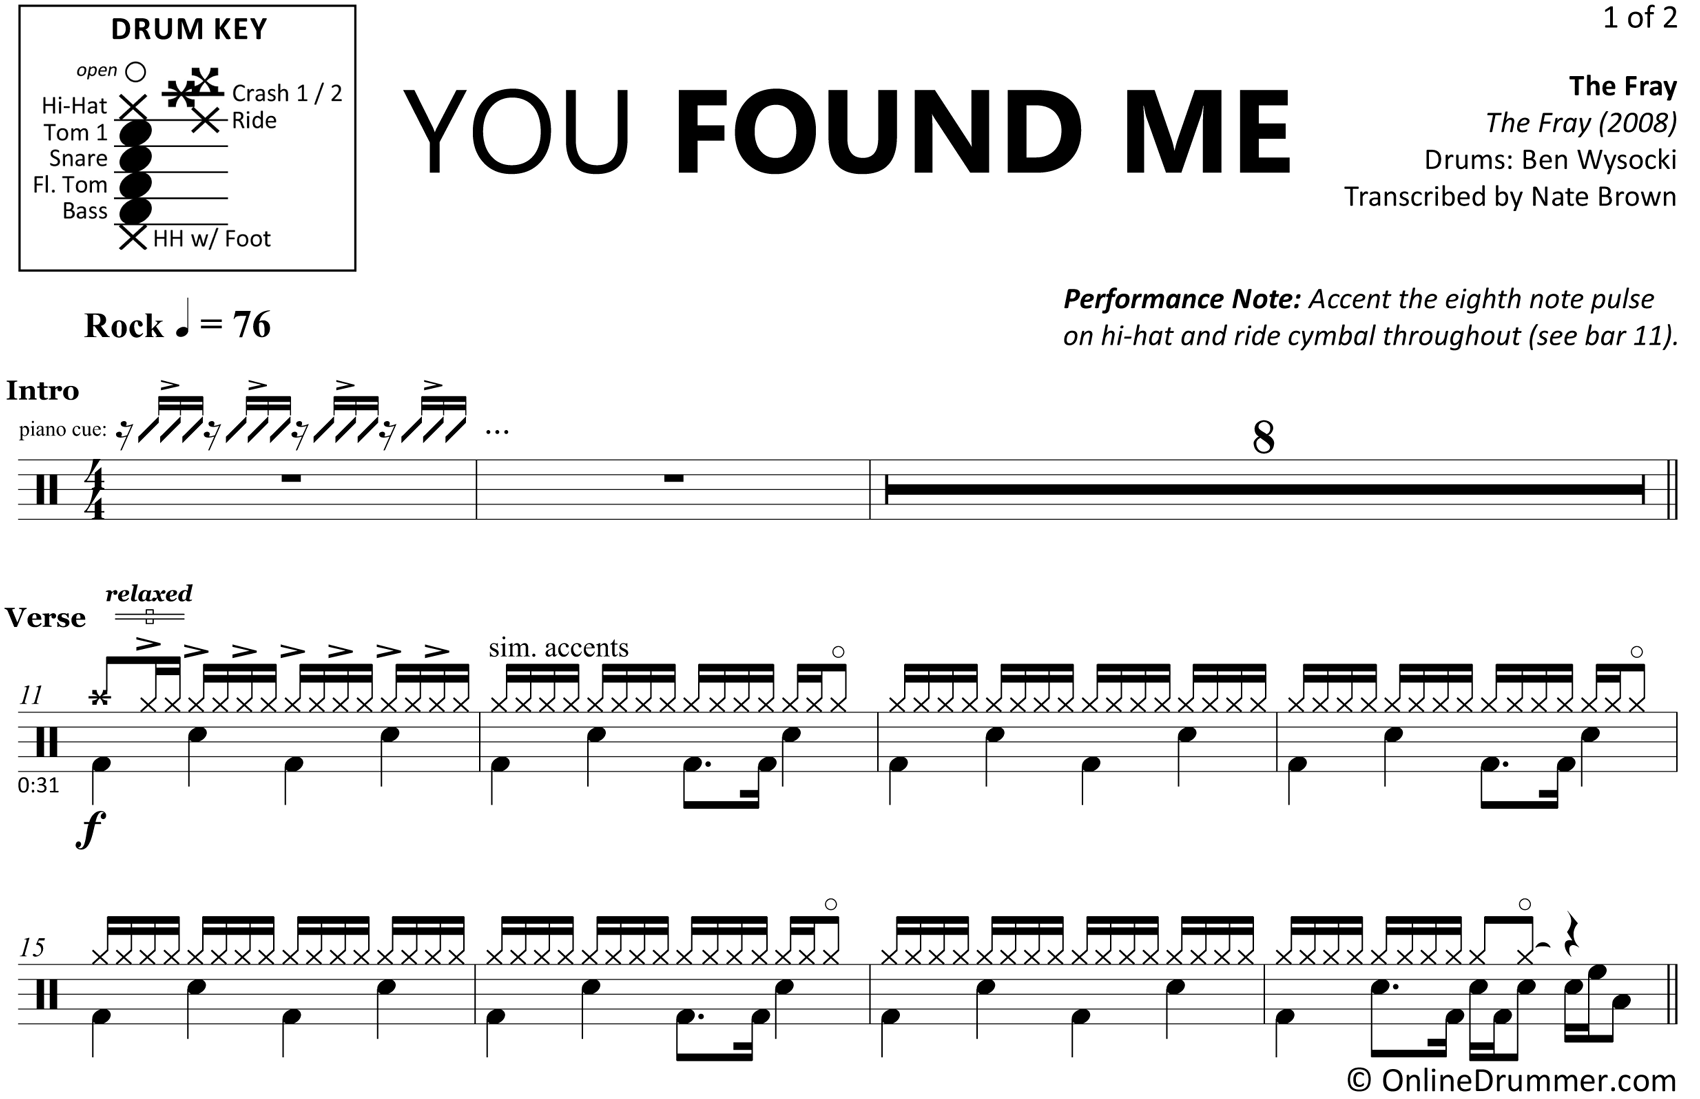 You Found Me - The Fray - Drum Sheet Music